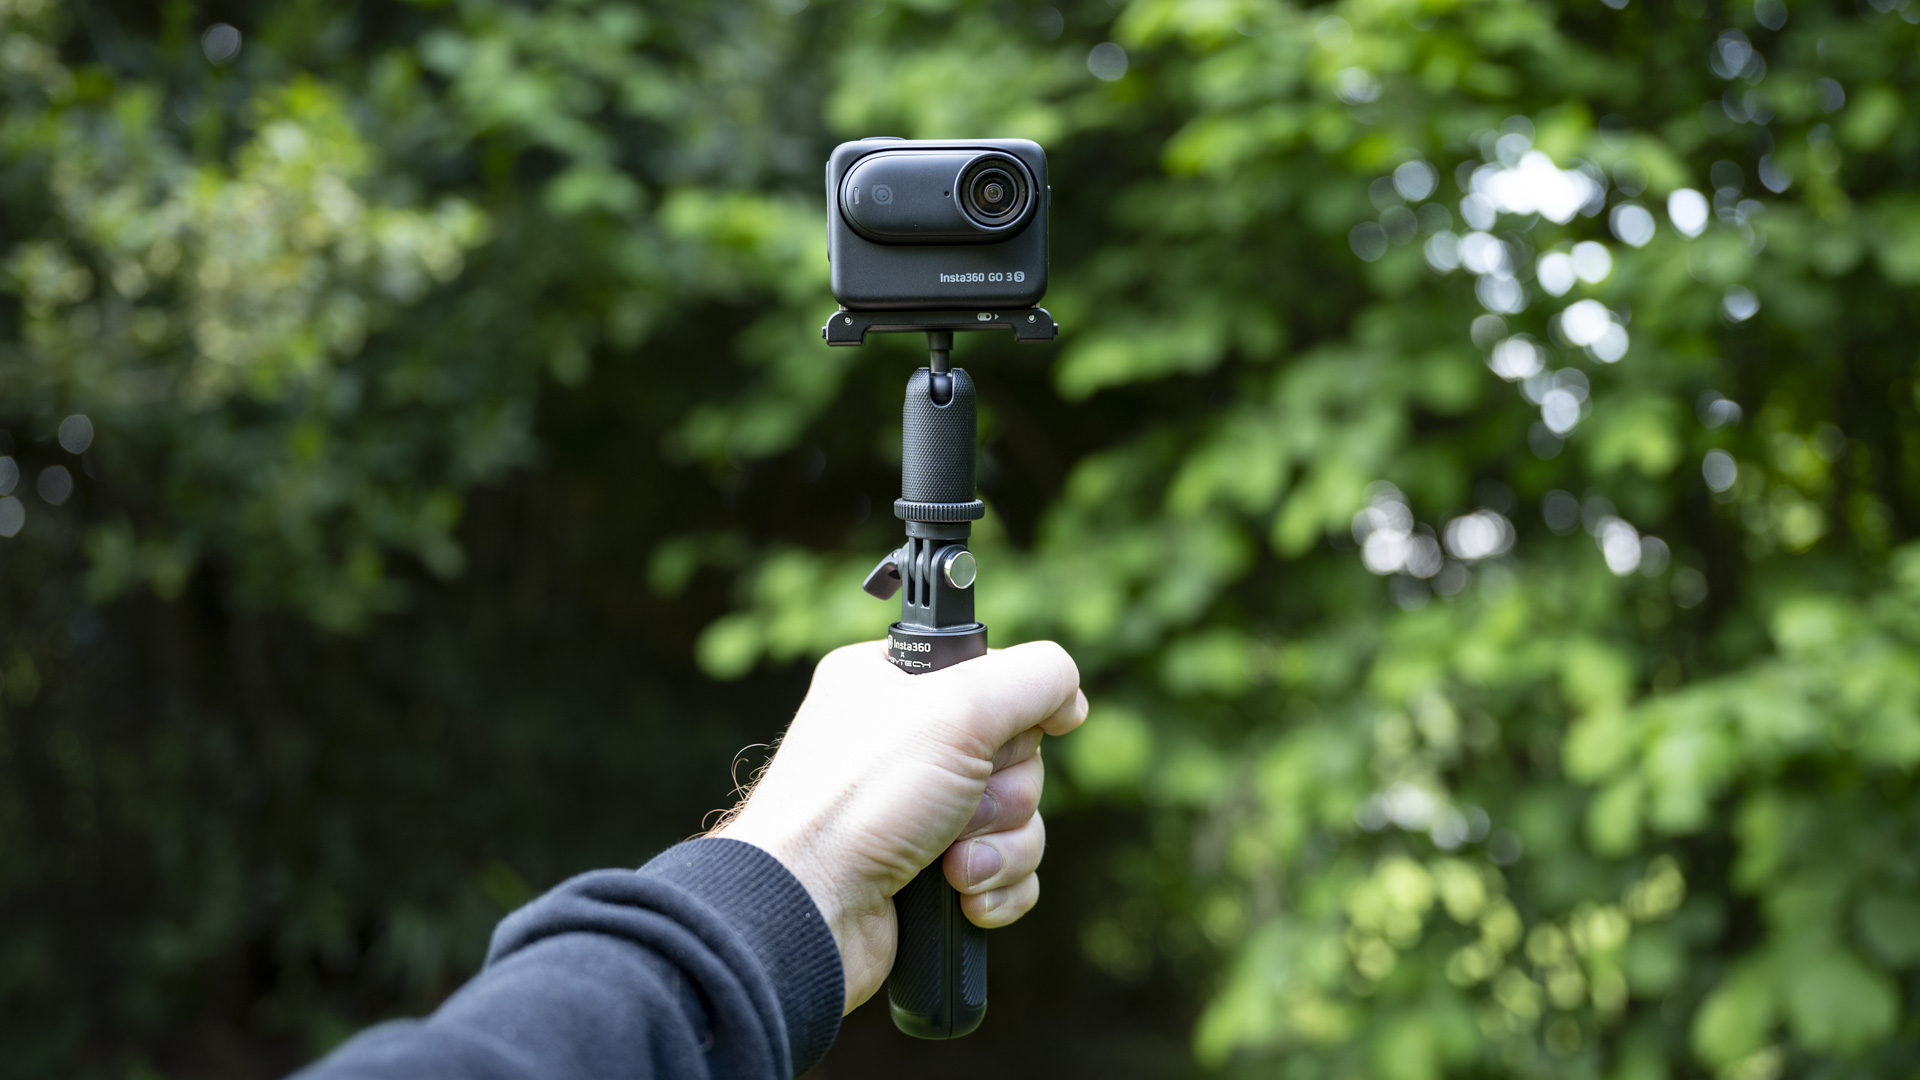 Insta360 Go 3S camera in its housing attached to a selfie stick, outdoors